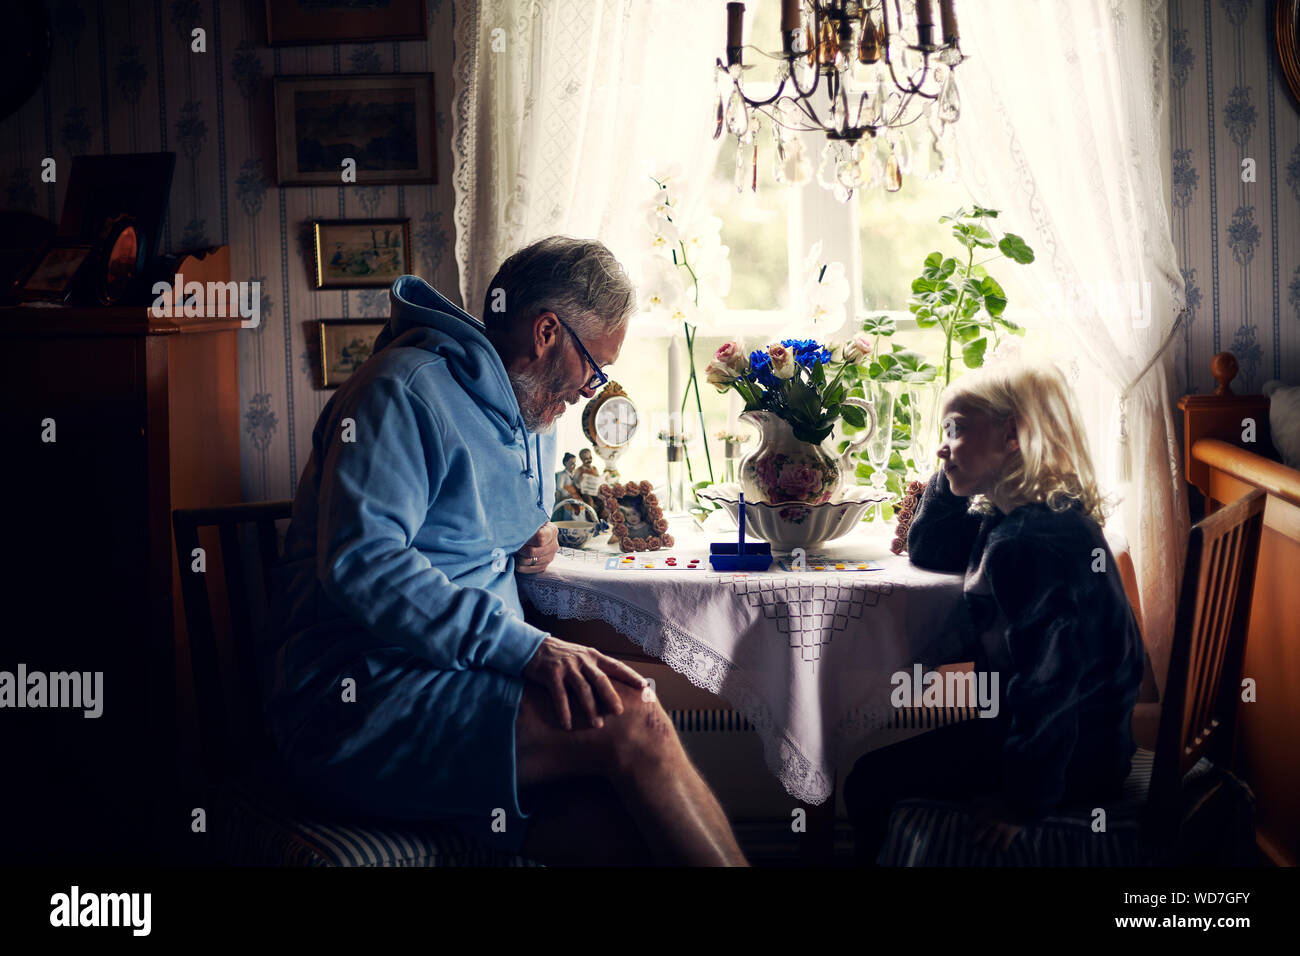 Grandfather and granddaughter at table with flowers Stock Photo